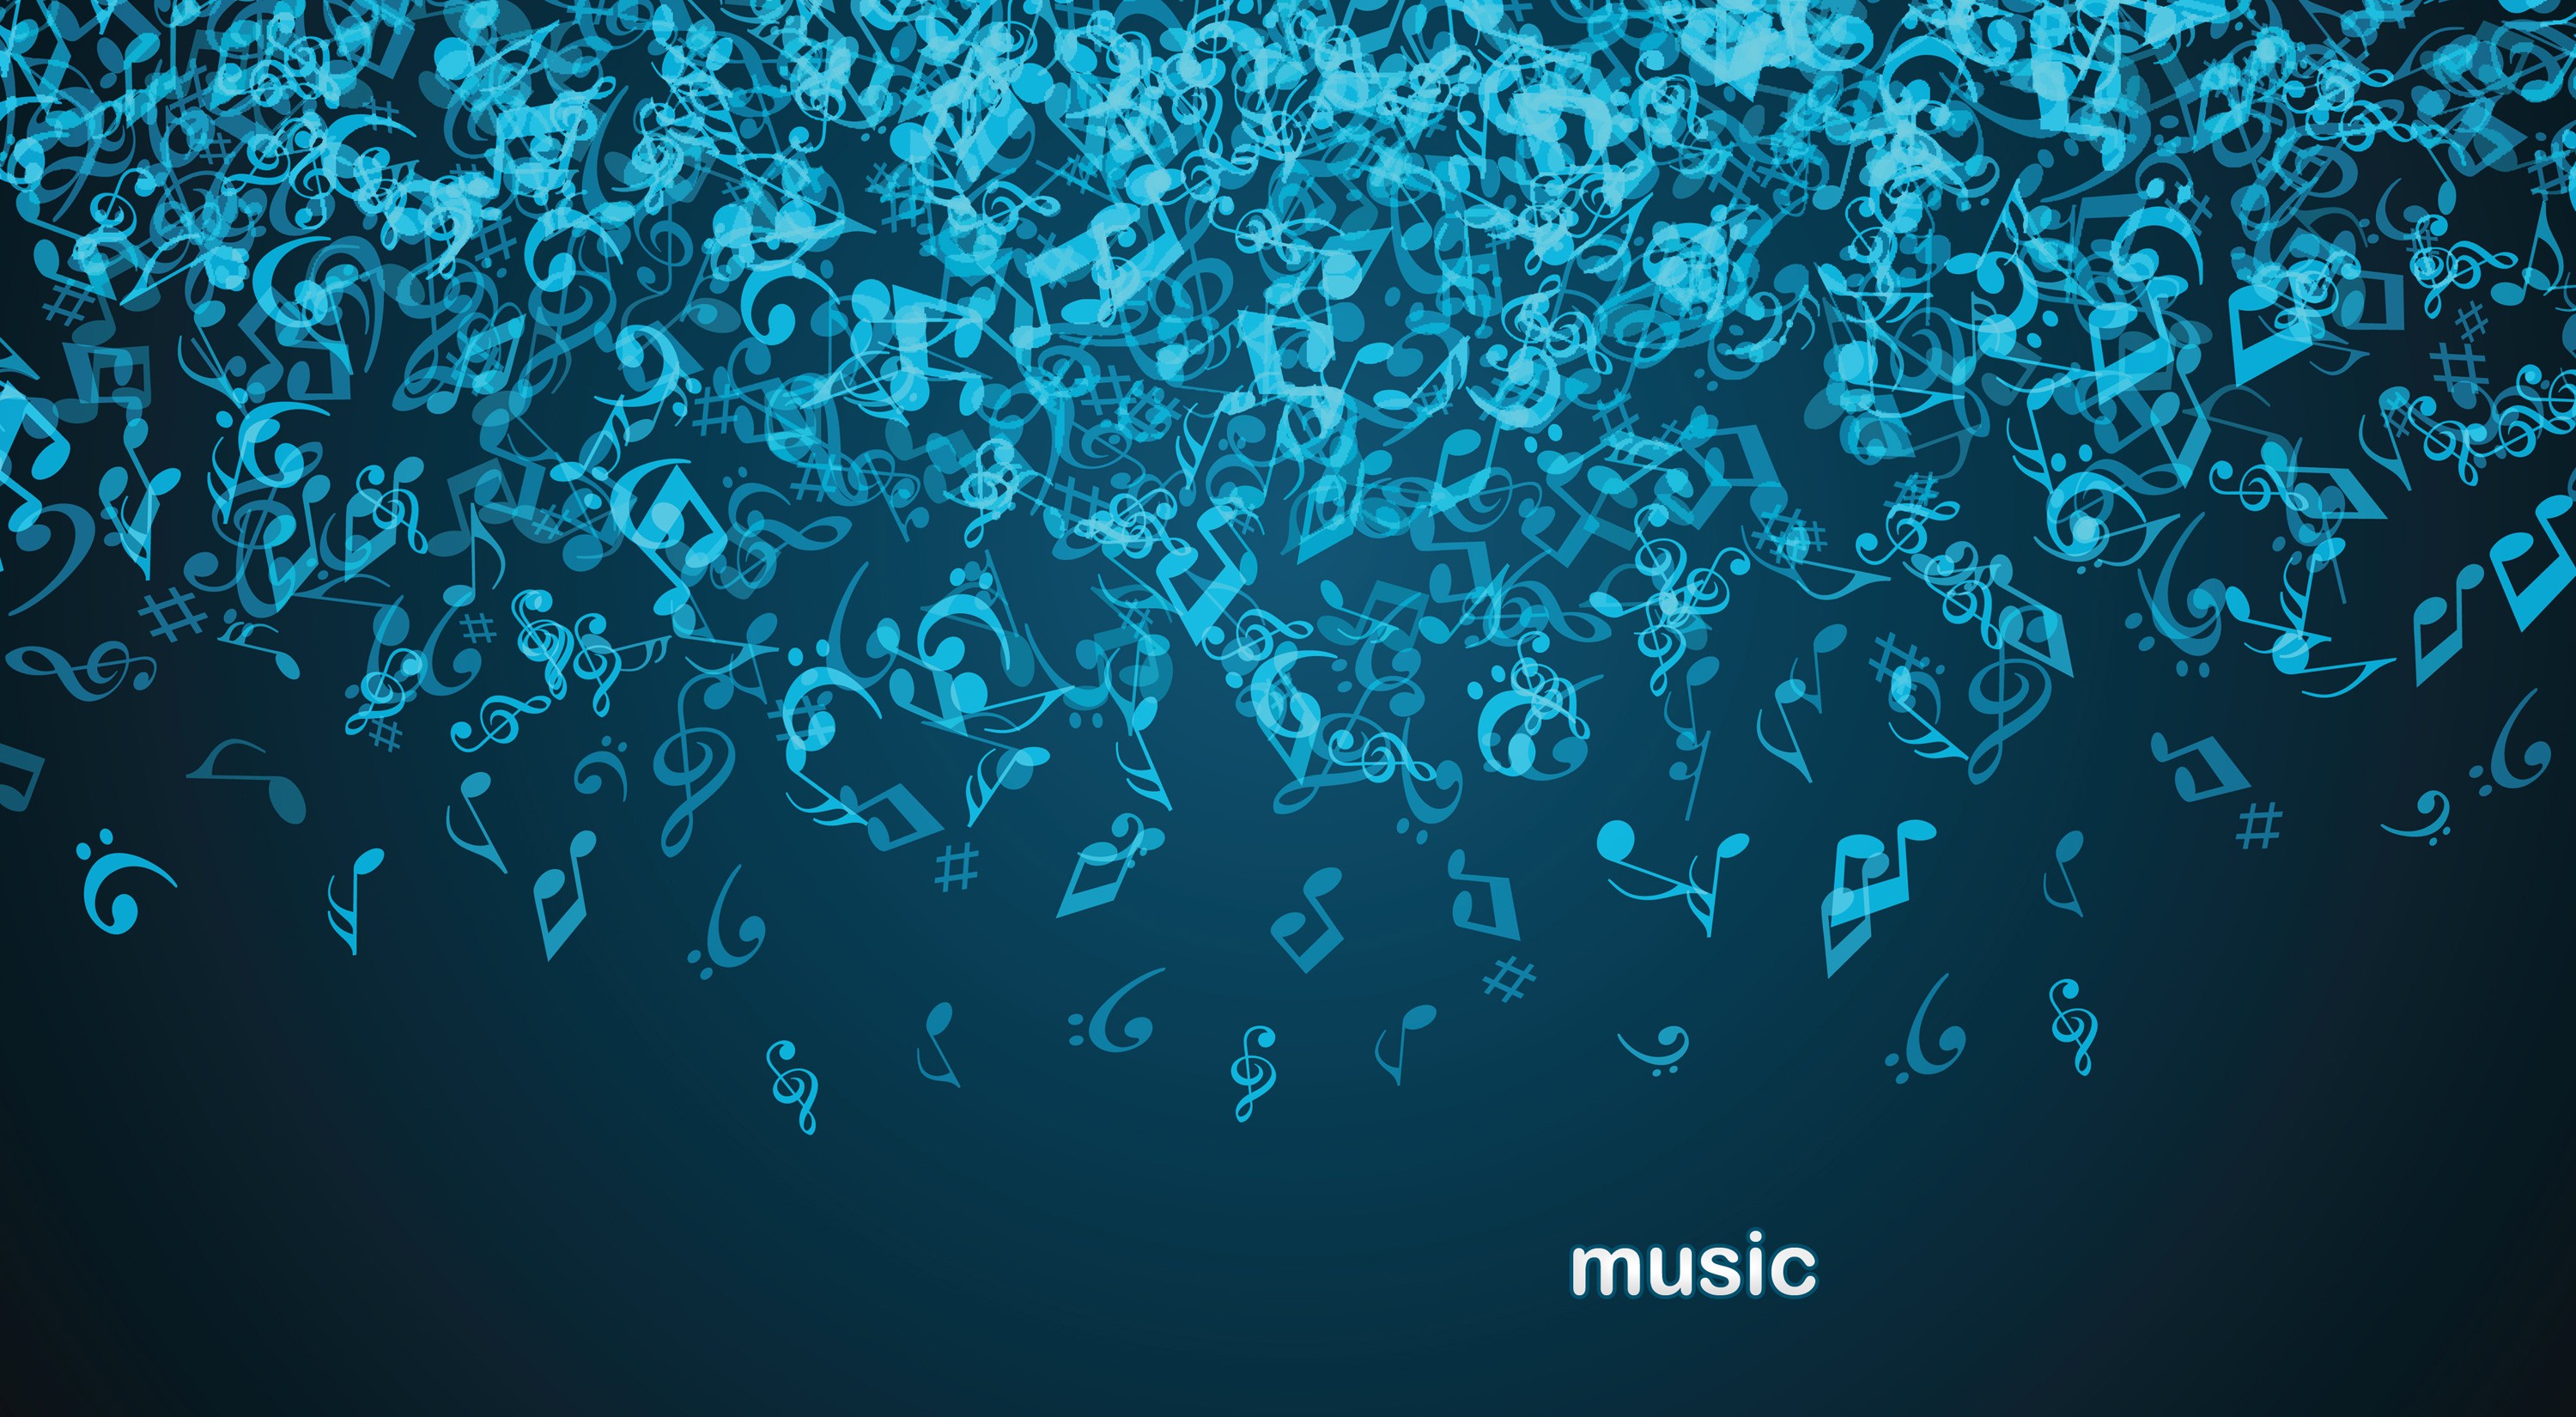 General 3000x1650 music musical notes digital art blue blue background typography